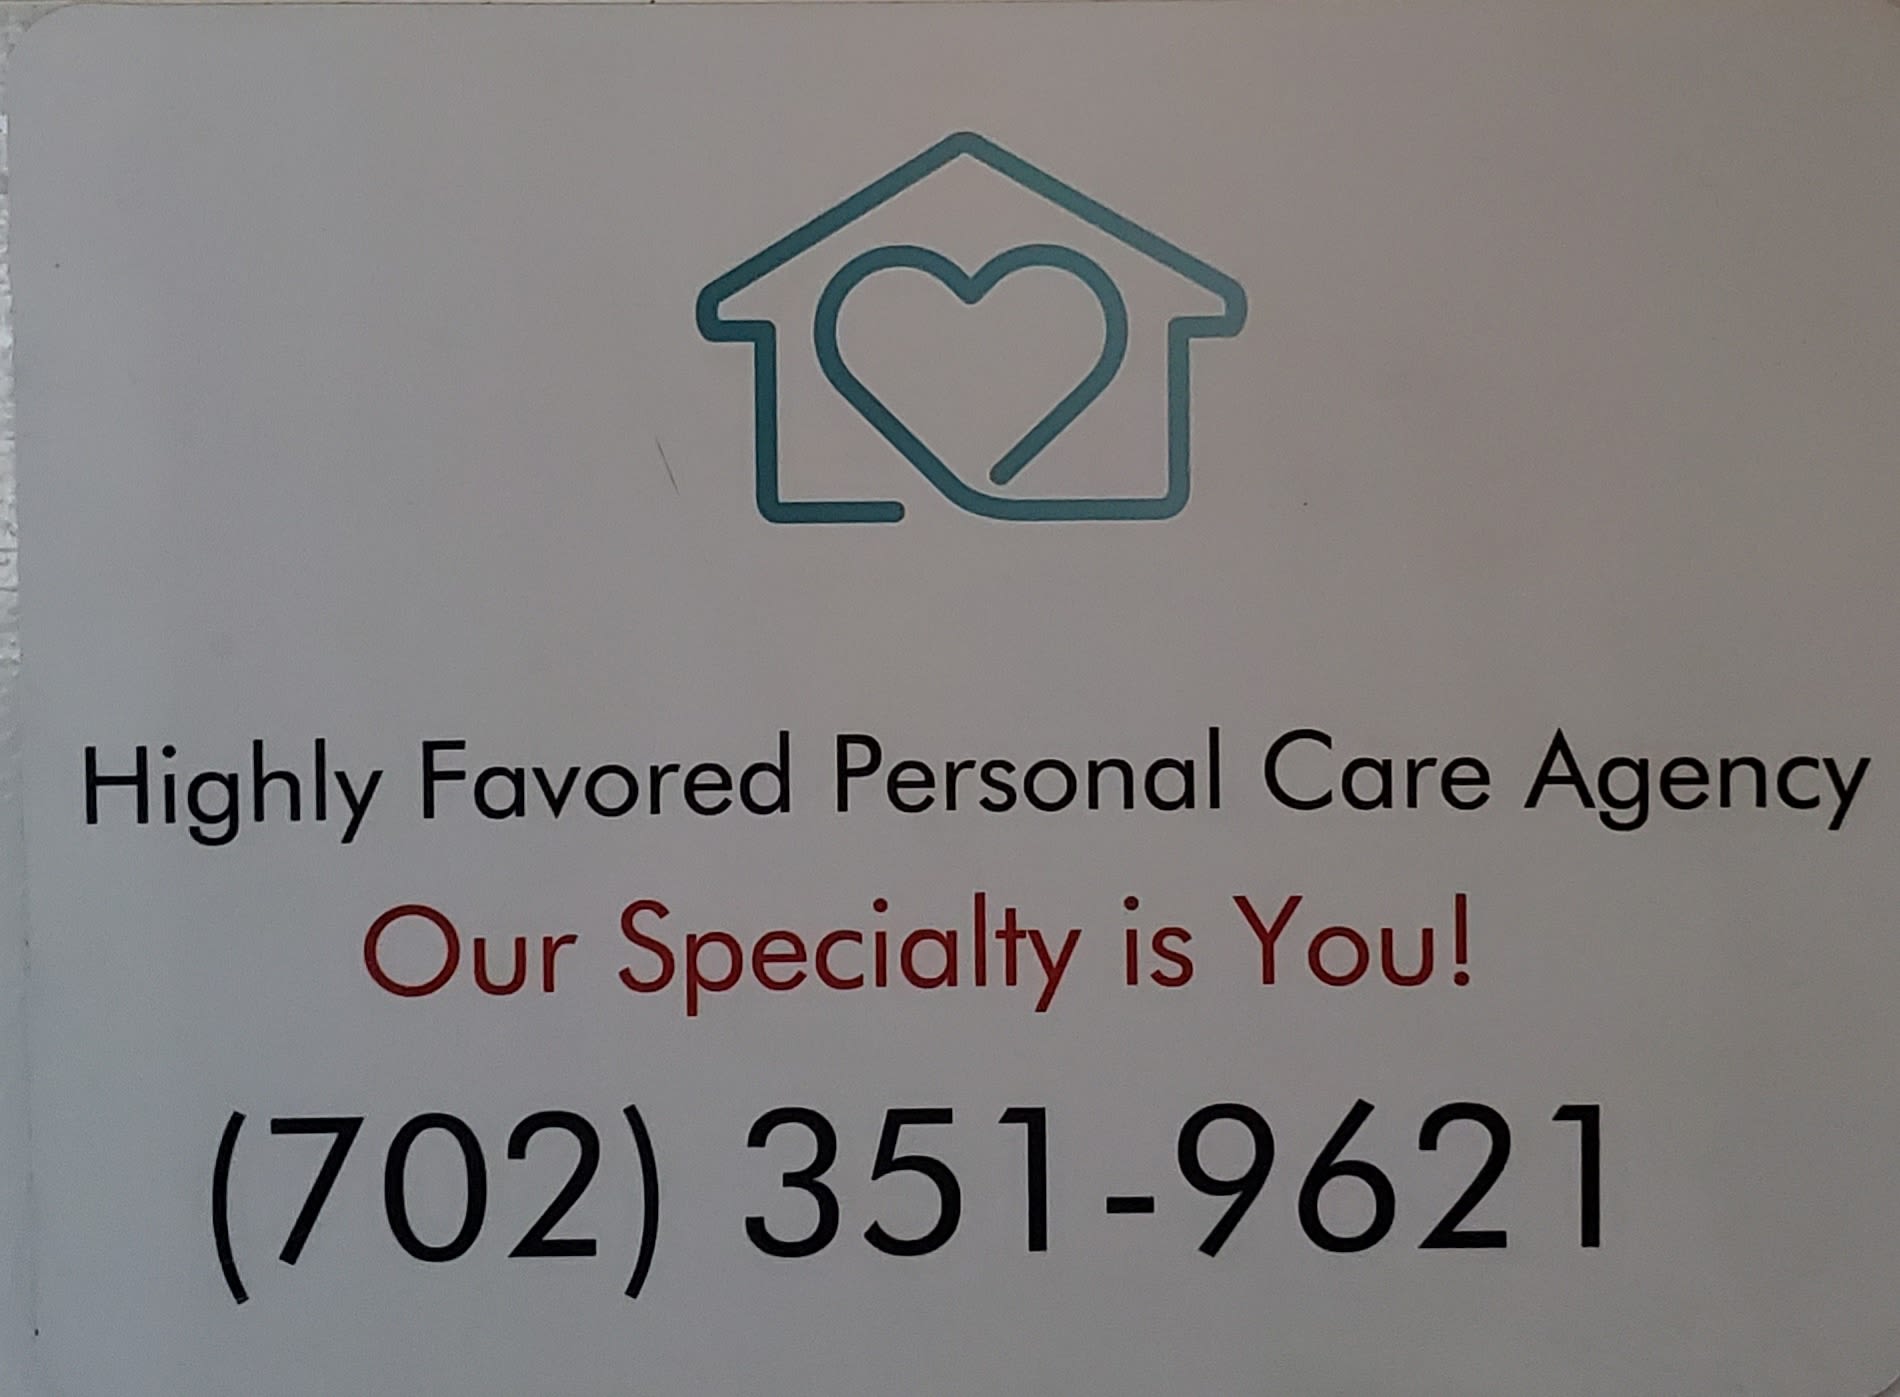 Highly Favored Personal Care Agency LLC